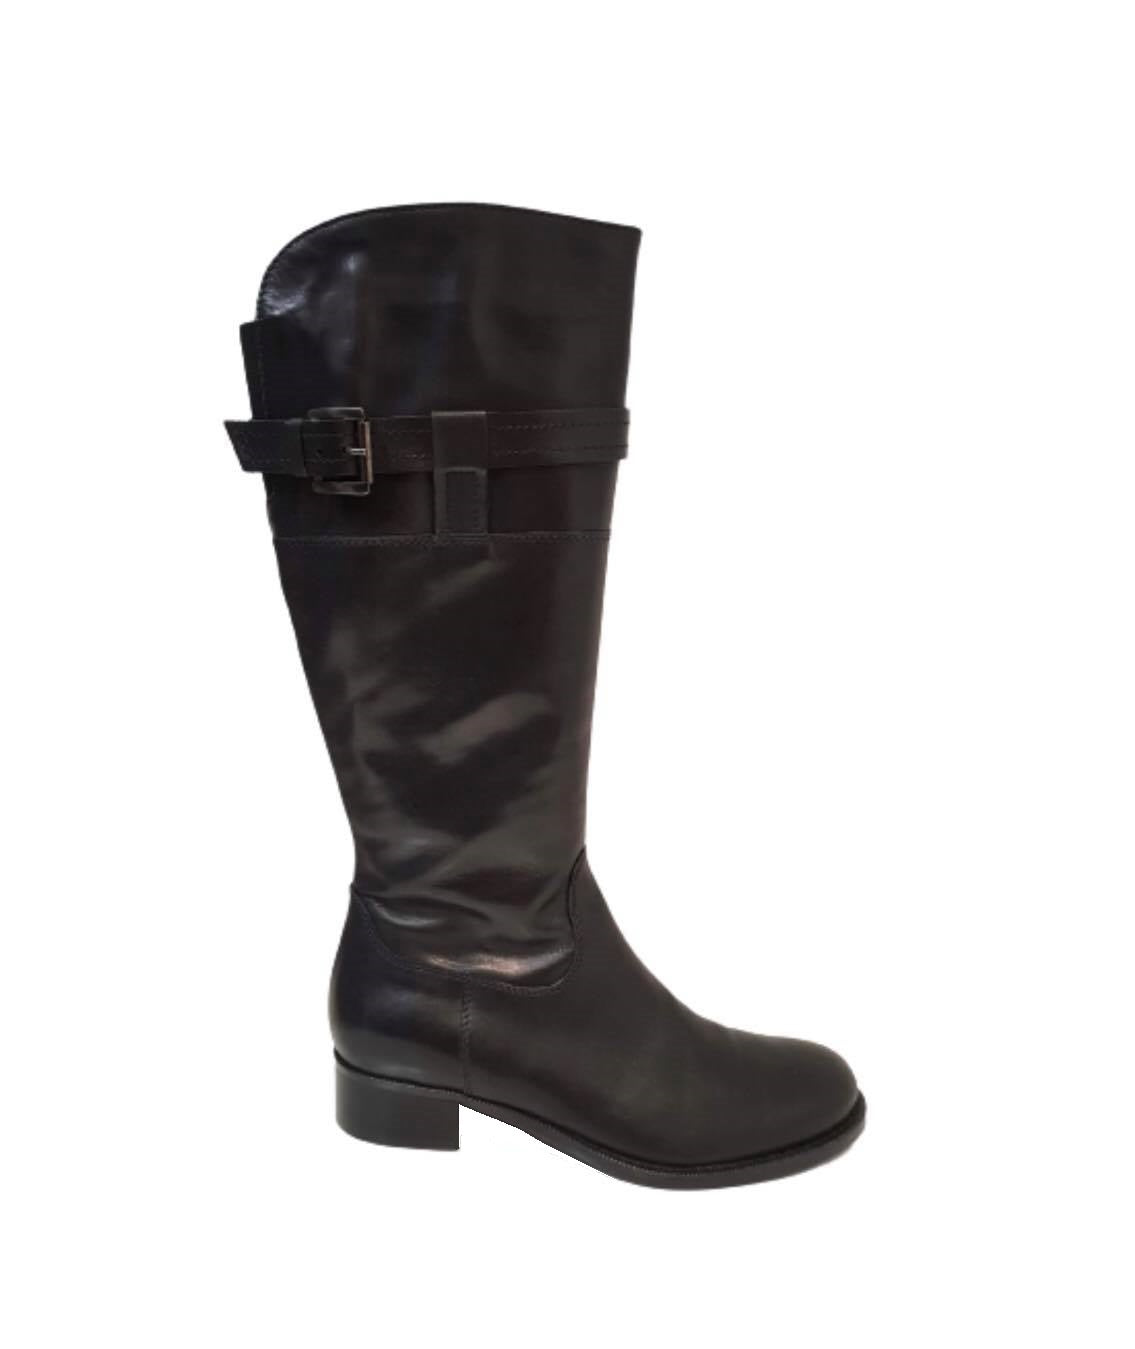 Progetto A011 Black Nero Knee High Zip Boots Made In Italy